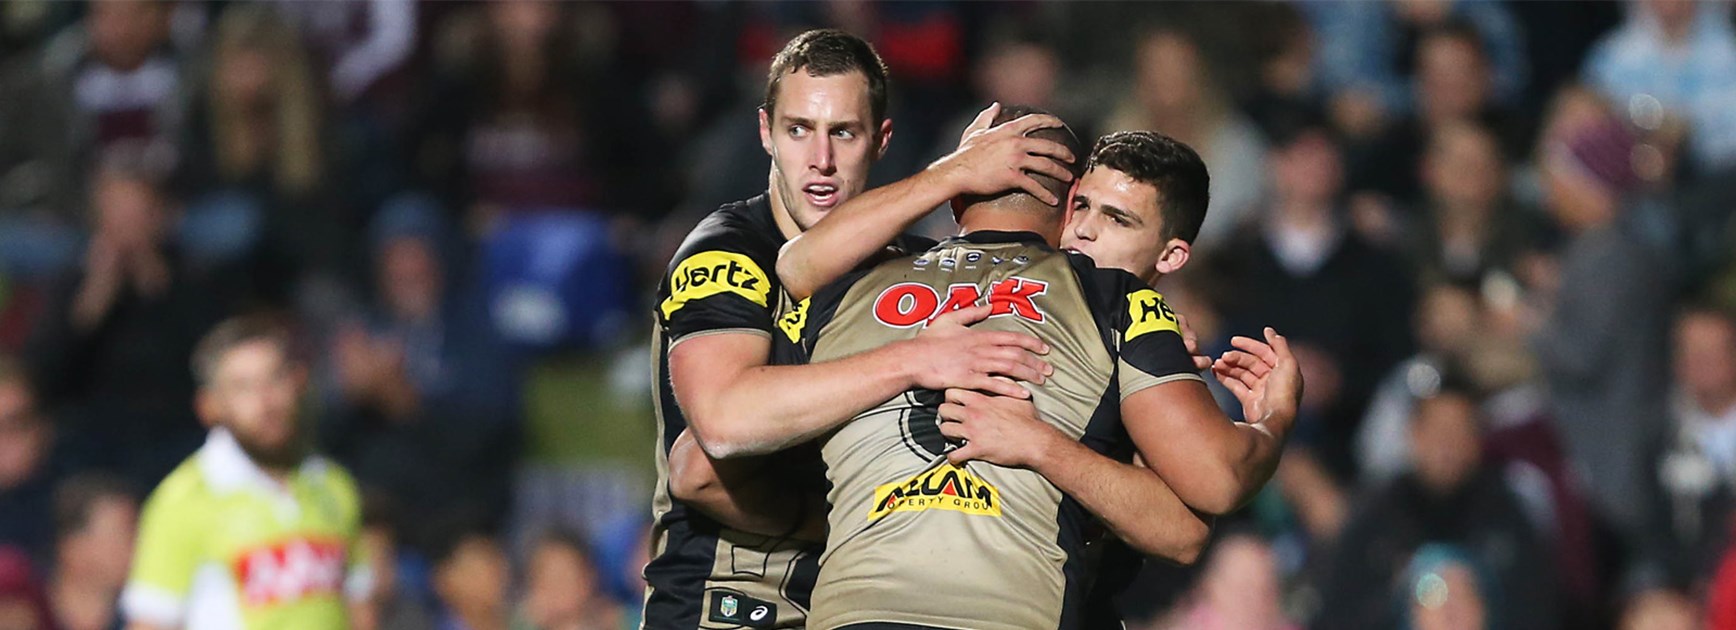 The Penrith Panthers pulled off a stunning second-half comeback to beat Manly on Sunday.